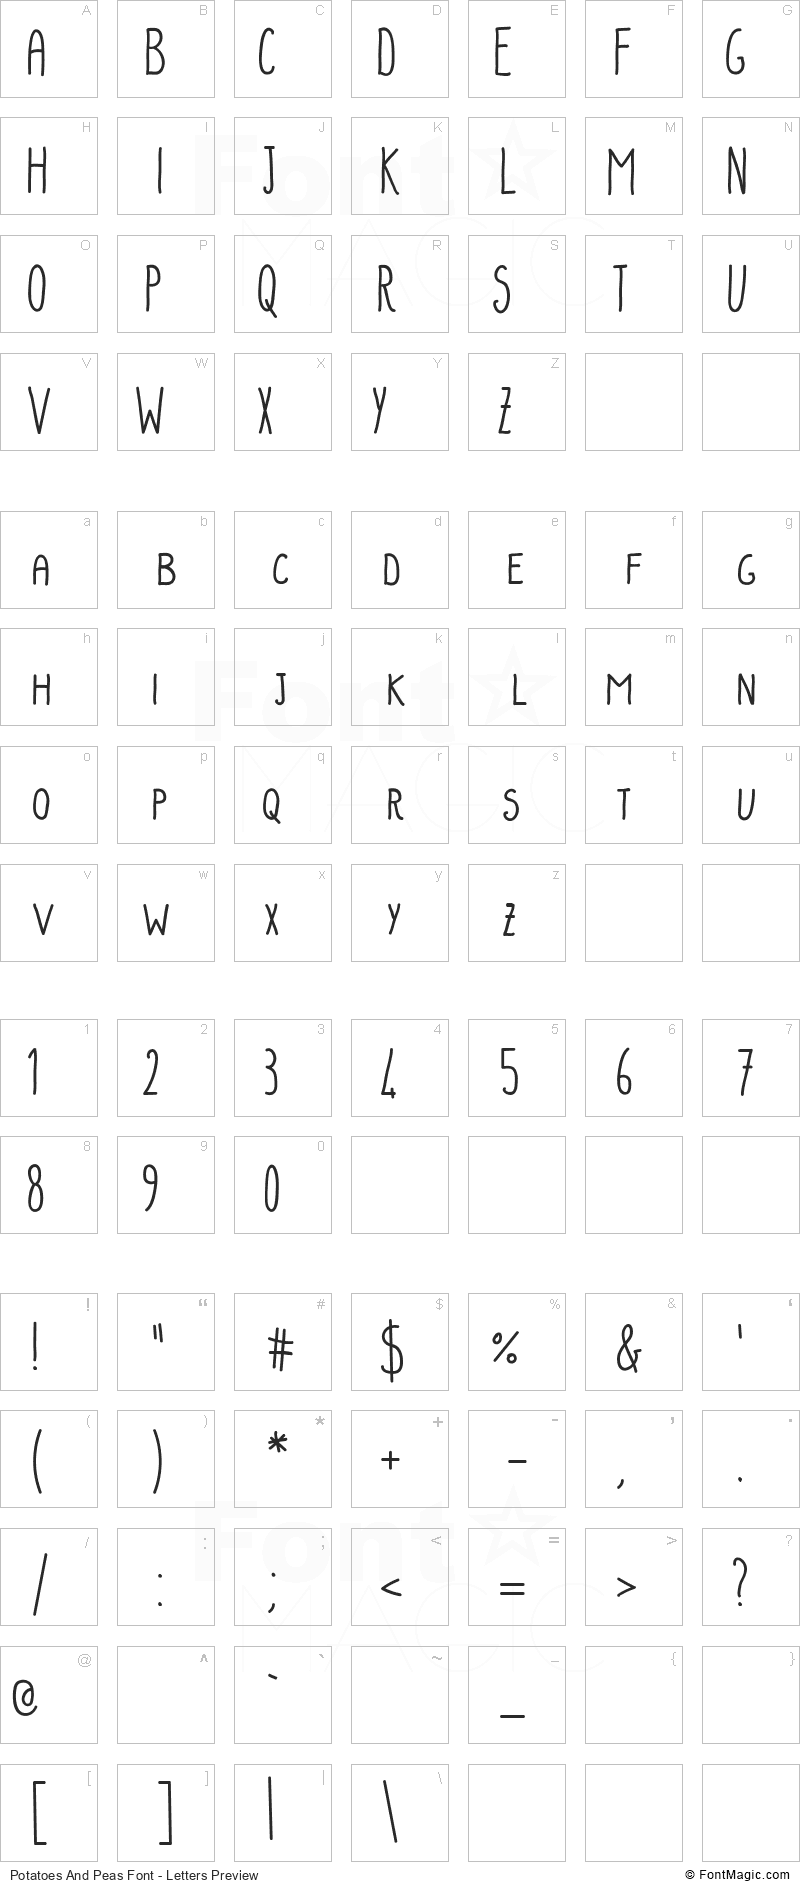 Potatoes And Peas Font - All Latters Preview Chart